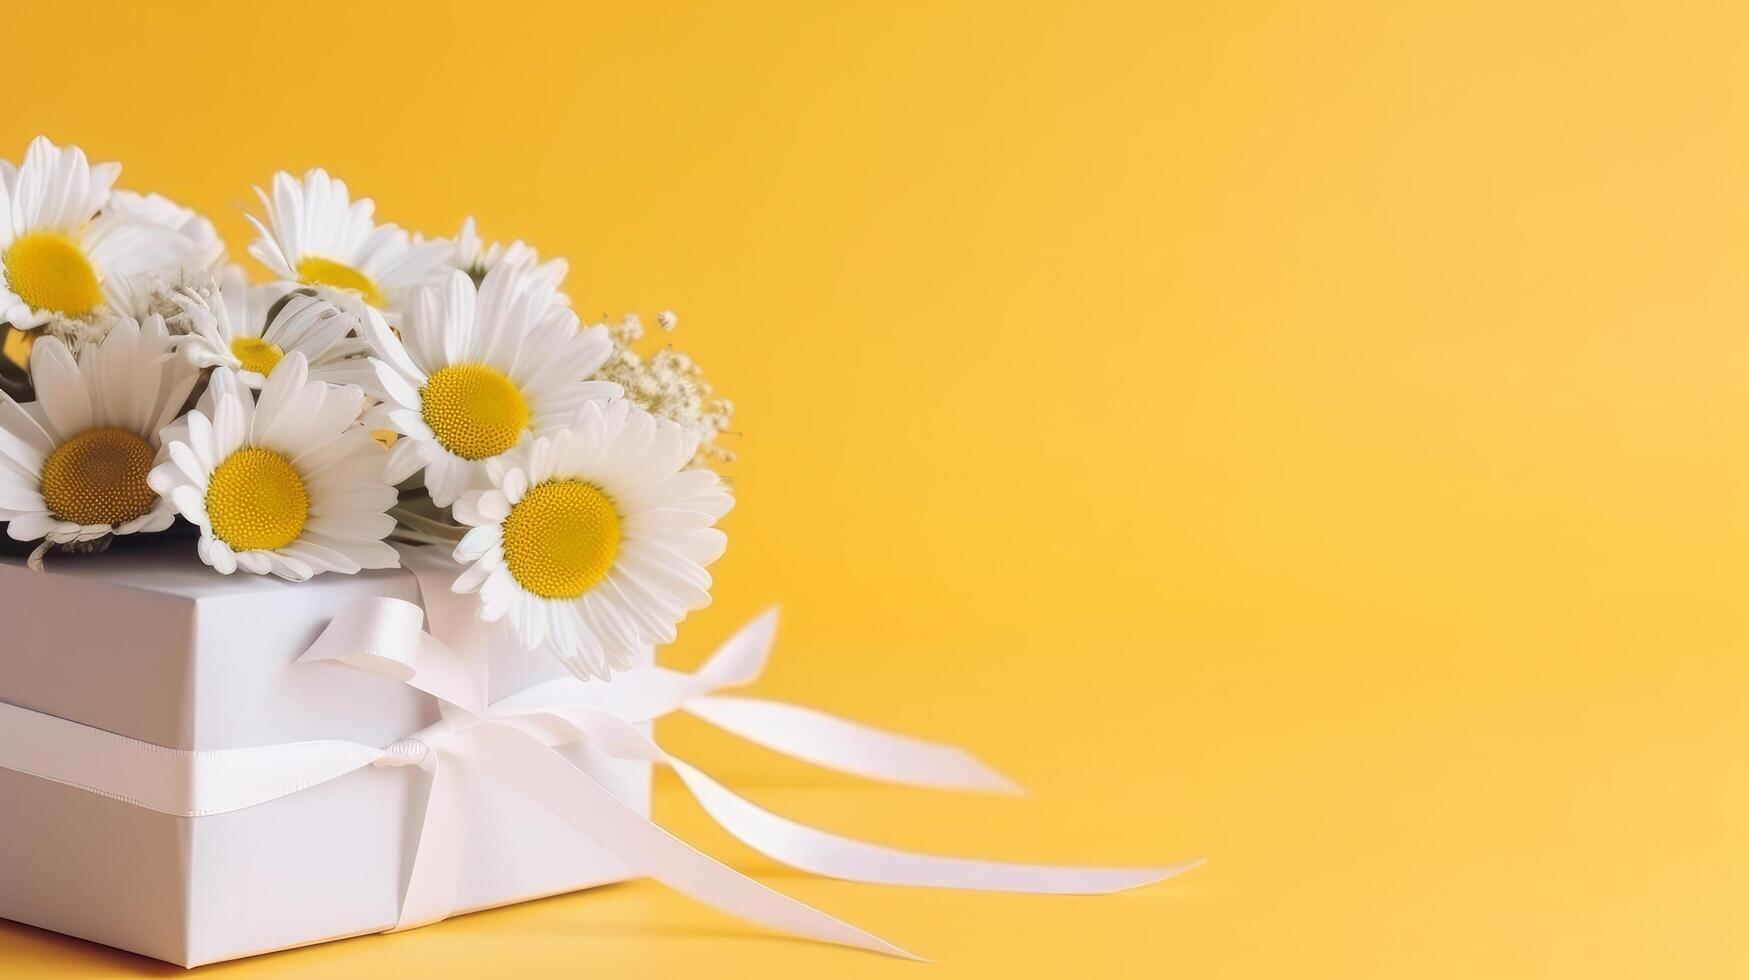 Yellow background with daisy flowers and gift box. Illustration photo